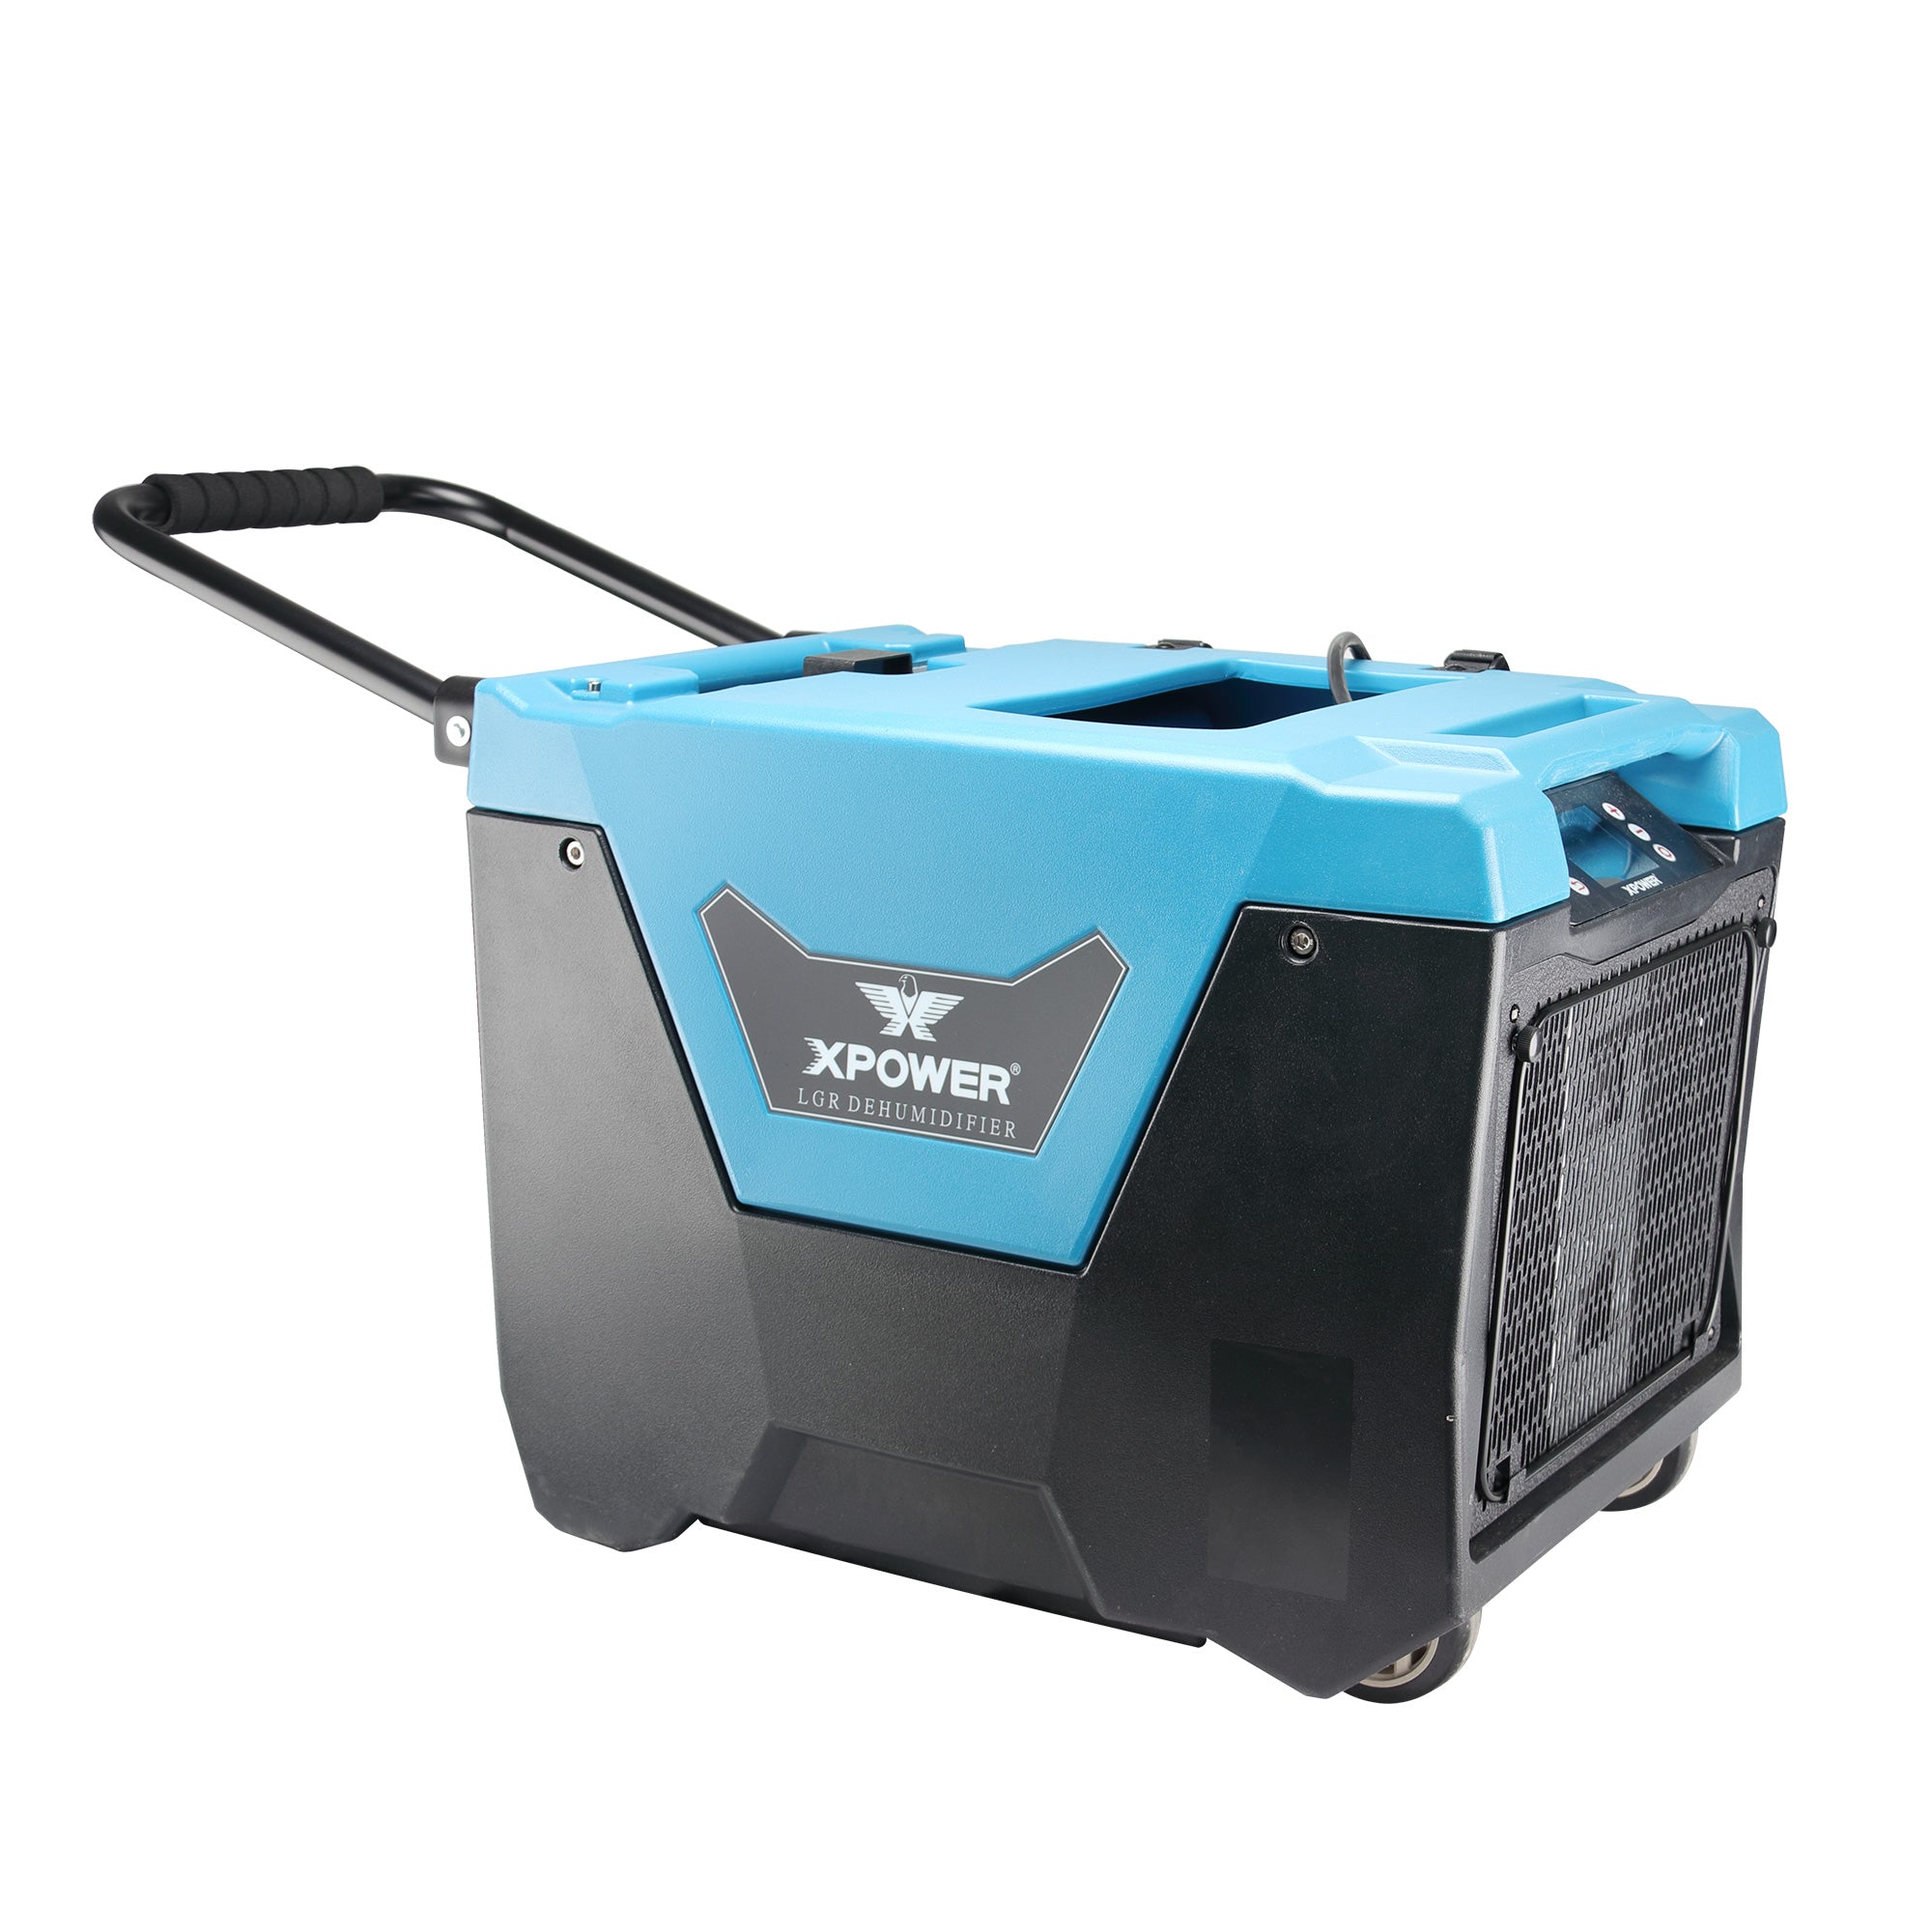 XPOWER XD-125Li 125-Pint Bluetooth LGR Commercial Dehumidifier with Auto Purge Pump, Hose, Handle and Wheels for Water Damage Restoration, Clean-up Flood, Basement, Mold, Mildew